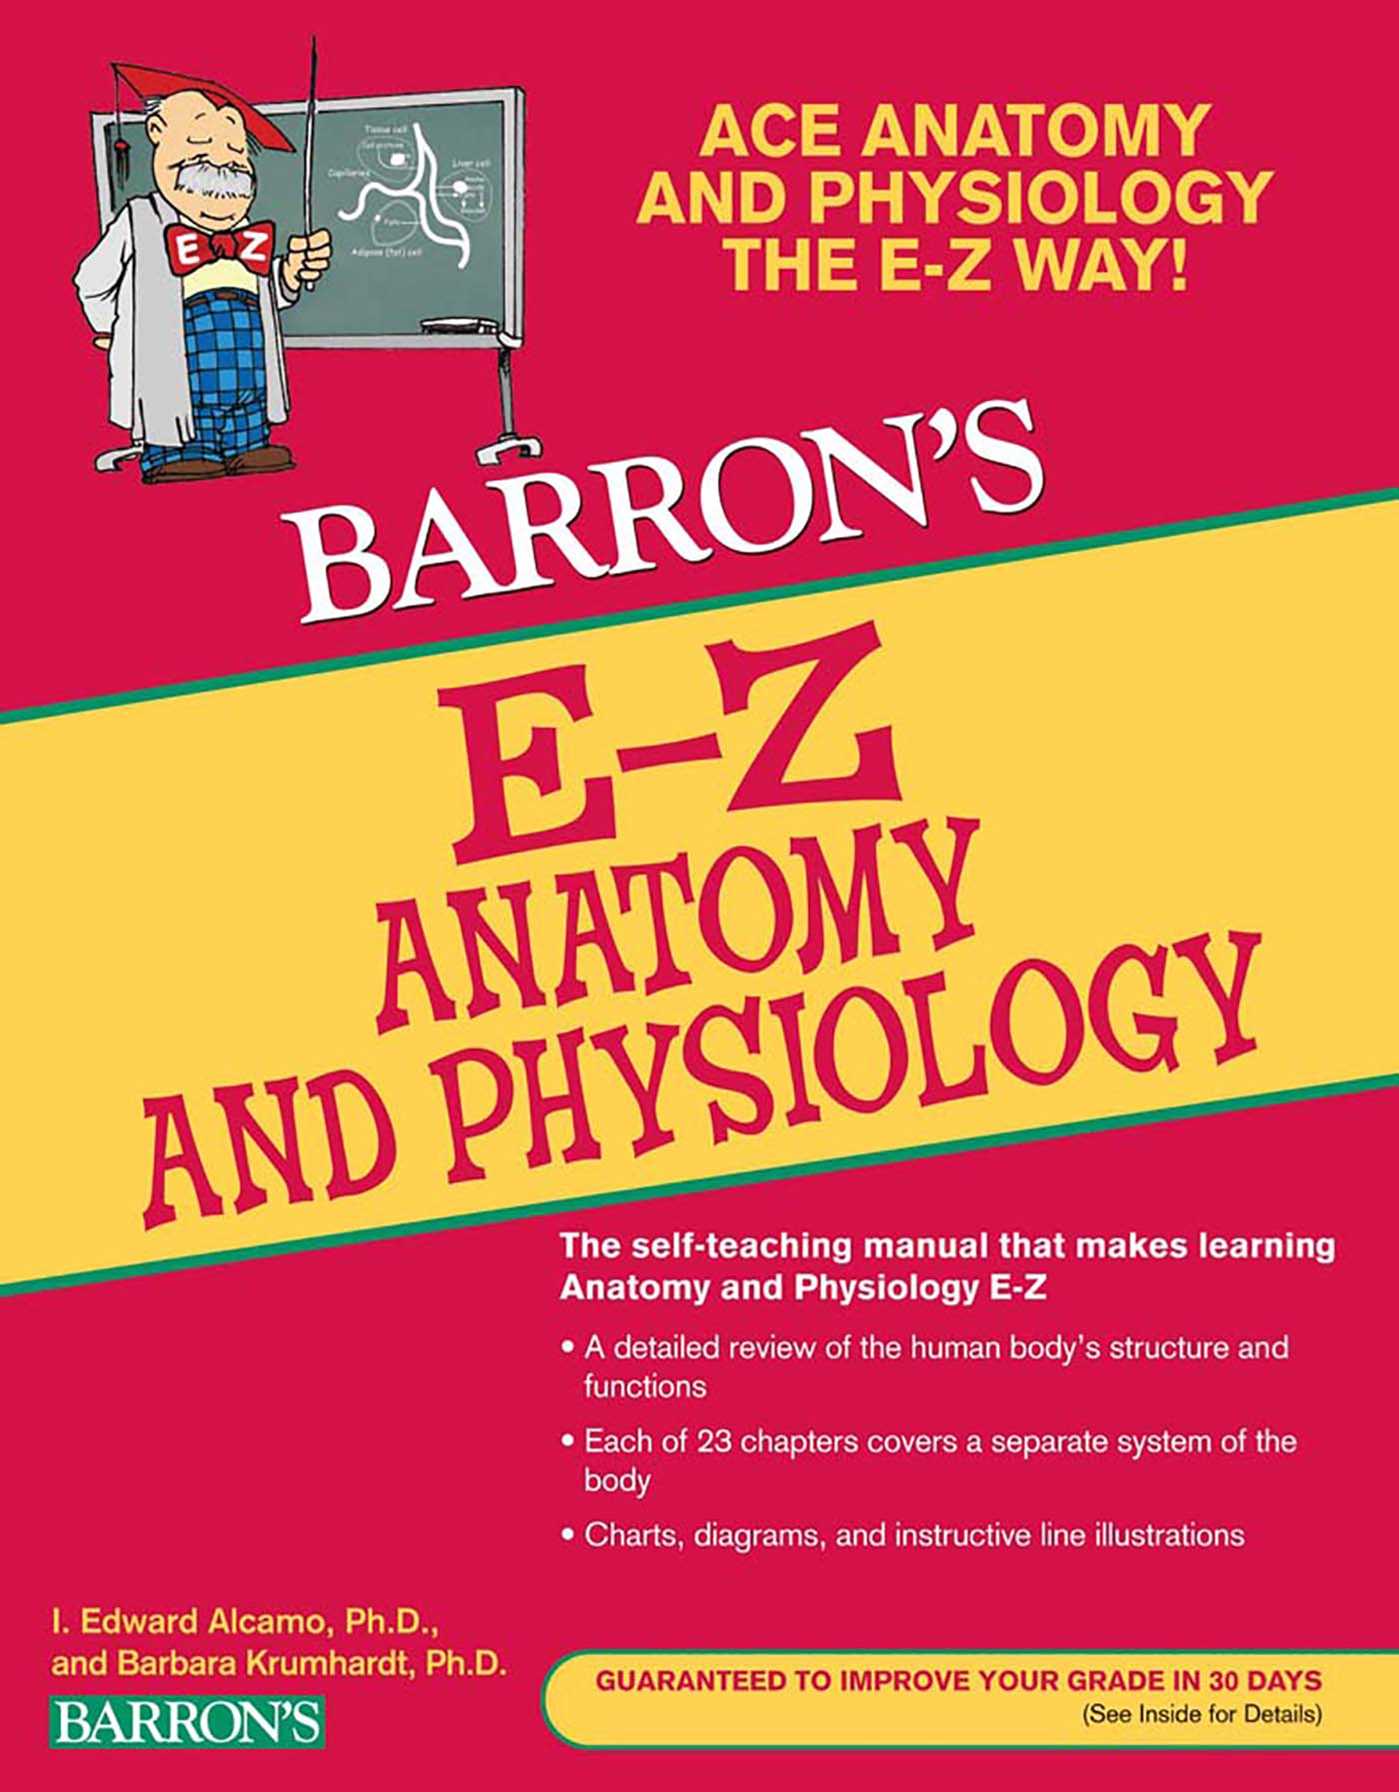 Barron's Easy Way: E-Z Anatomy and Physiology (Paperback) - image 2 of 2